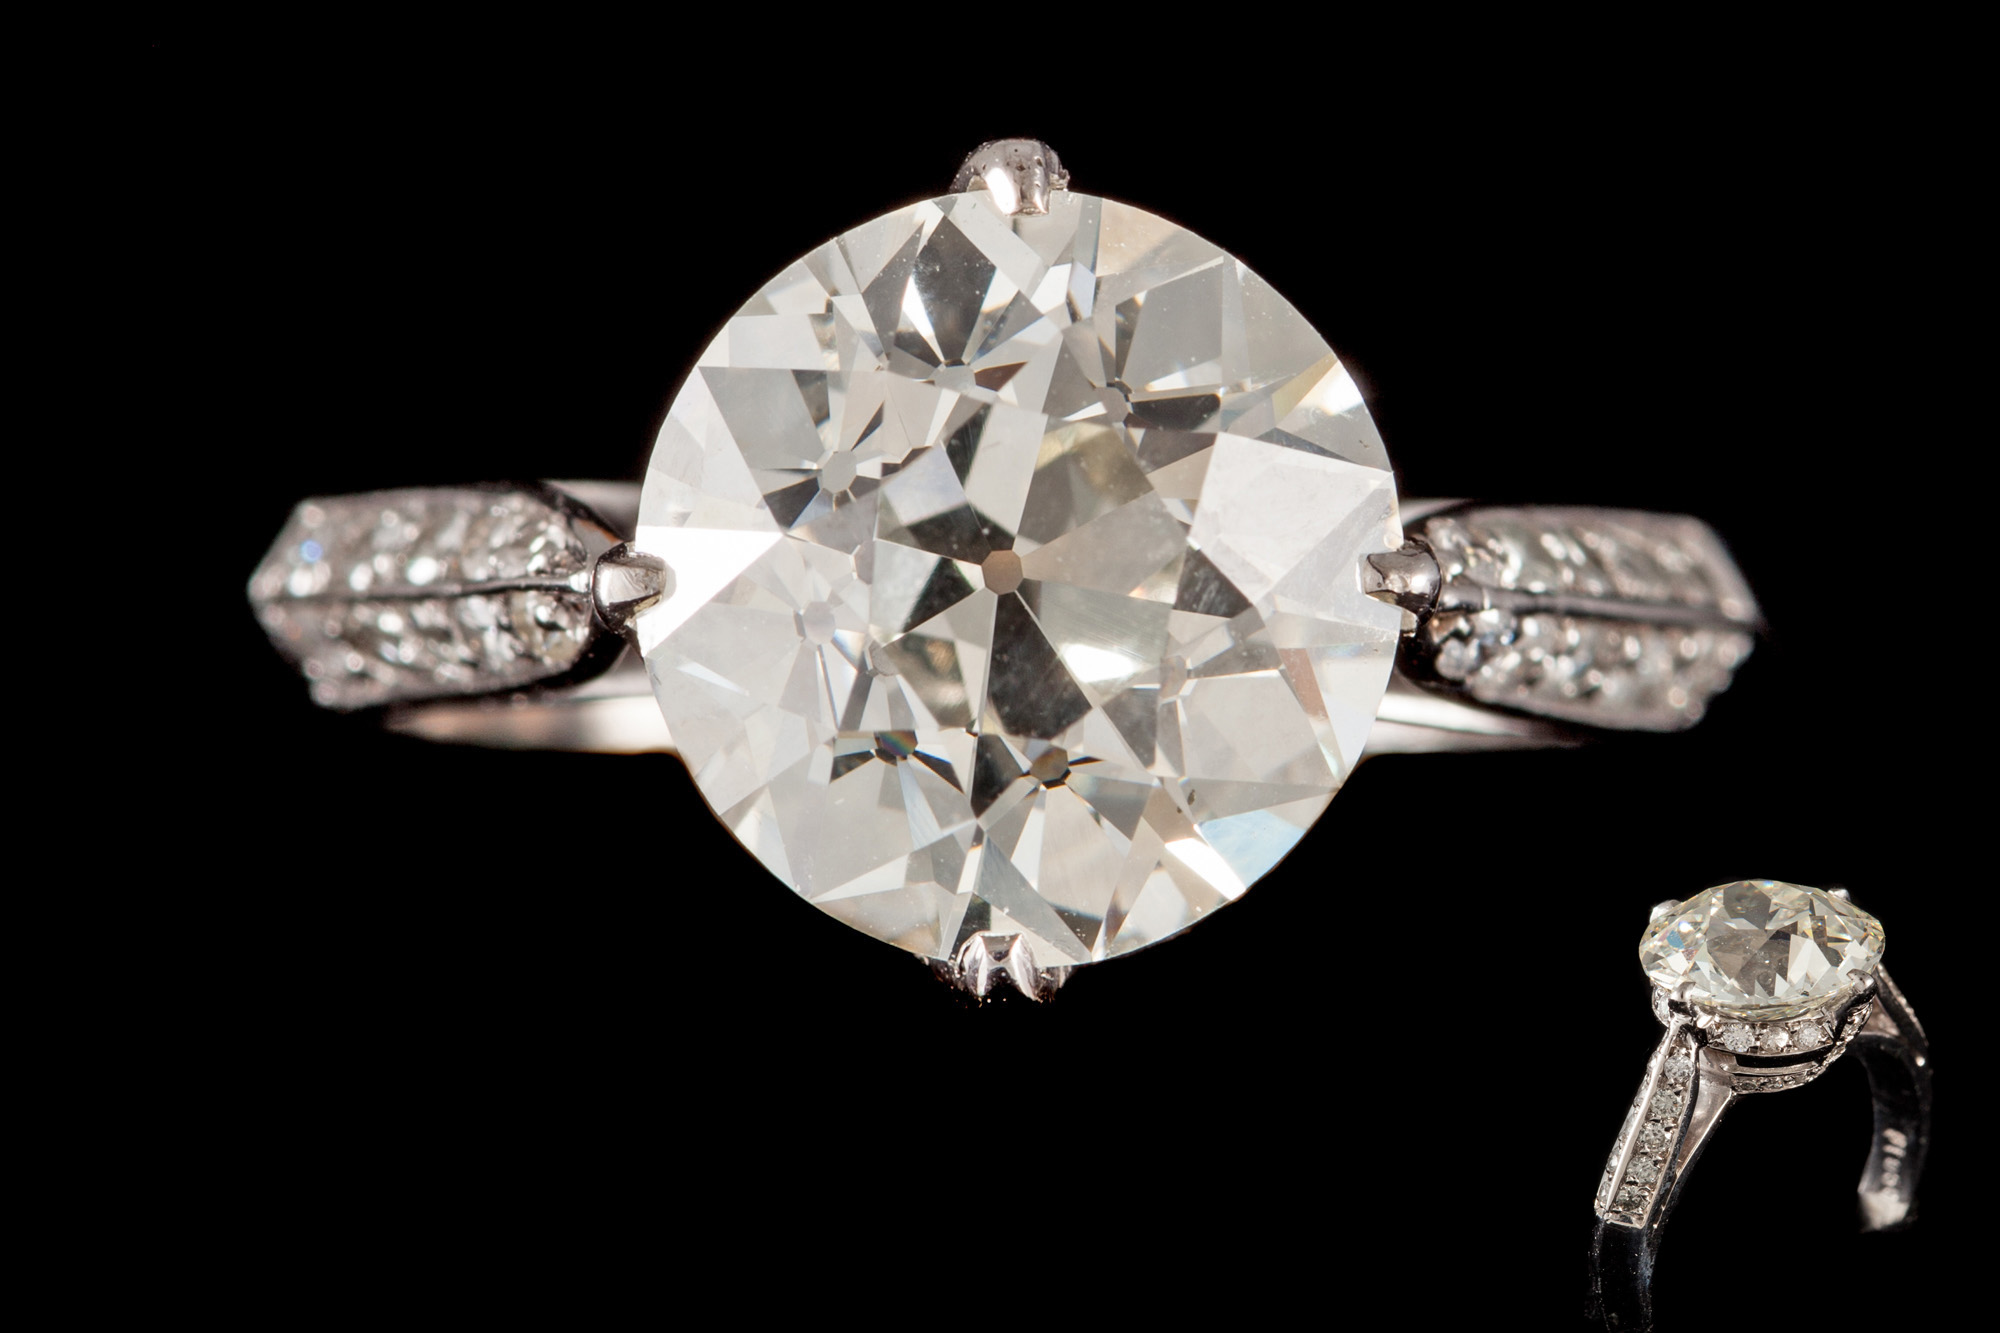 A DIAMOND SOLITAIRE RING, one old European brilliant cut diamond of approx. 3.